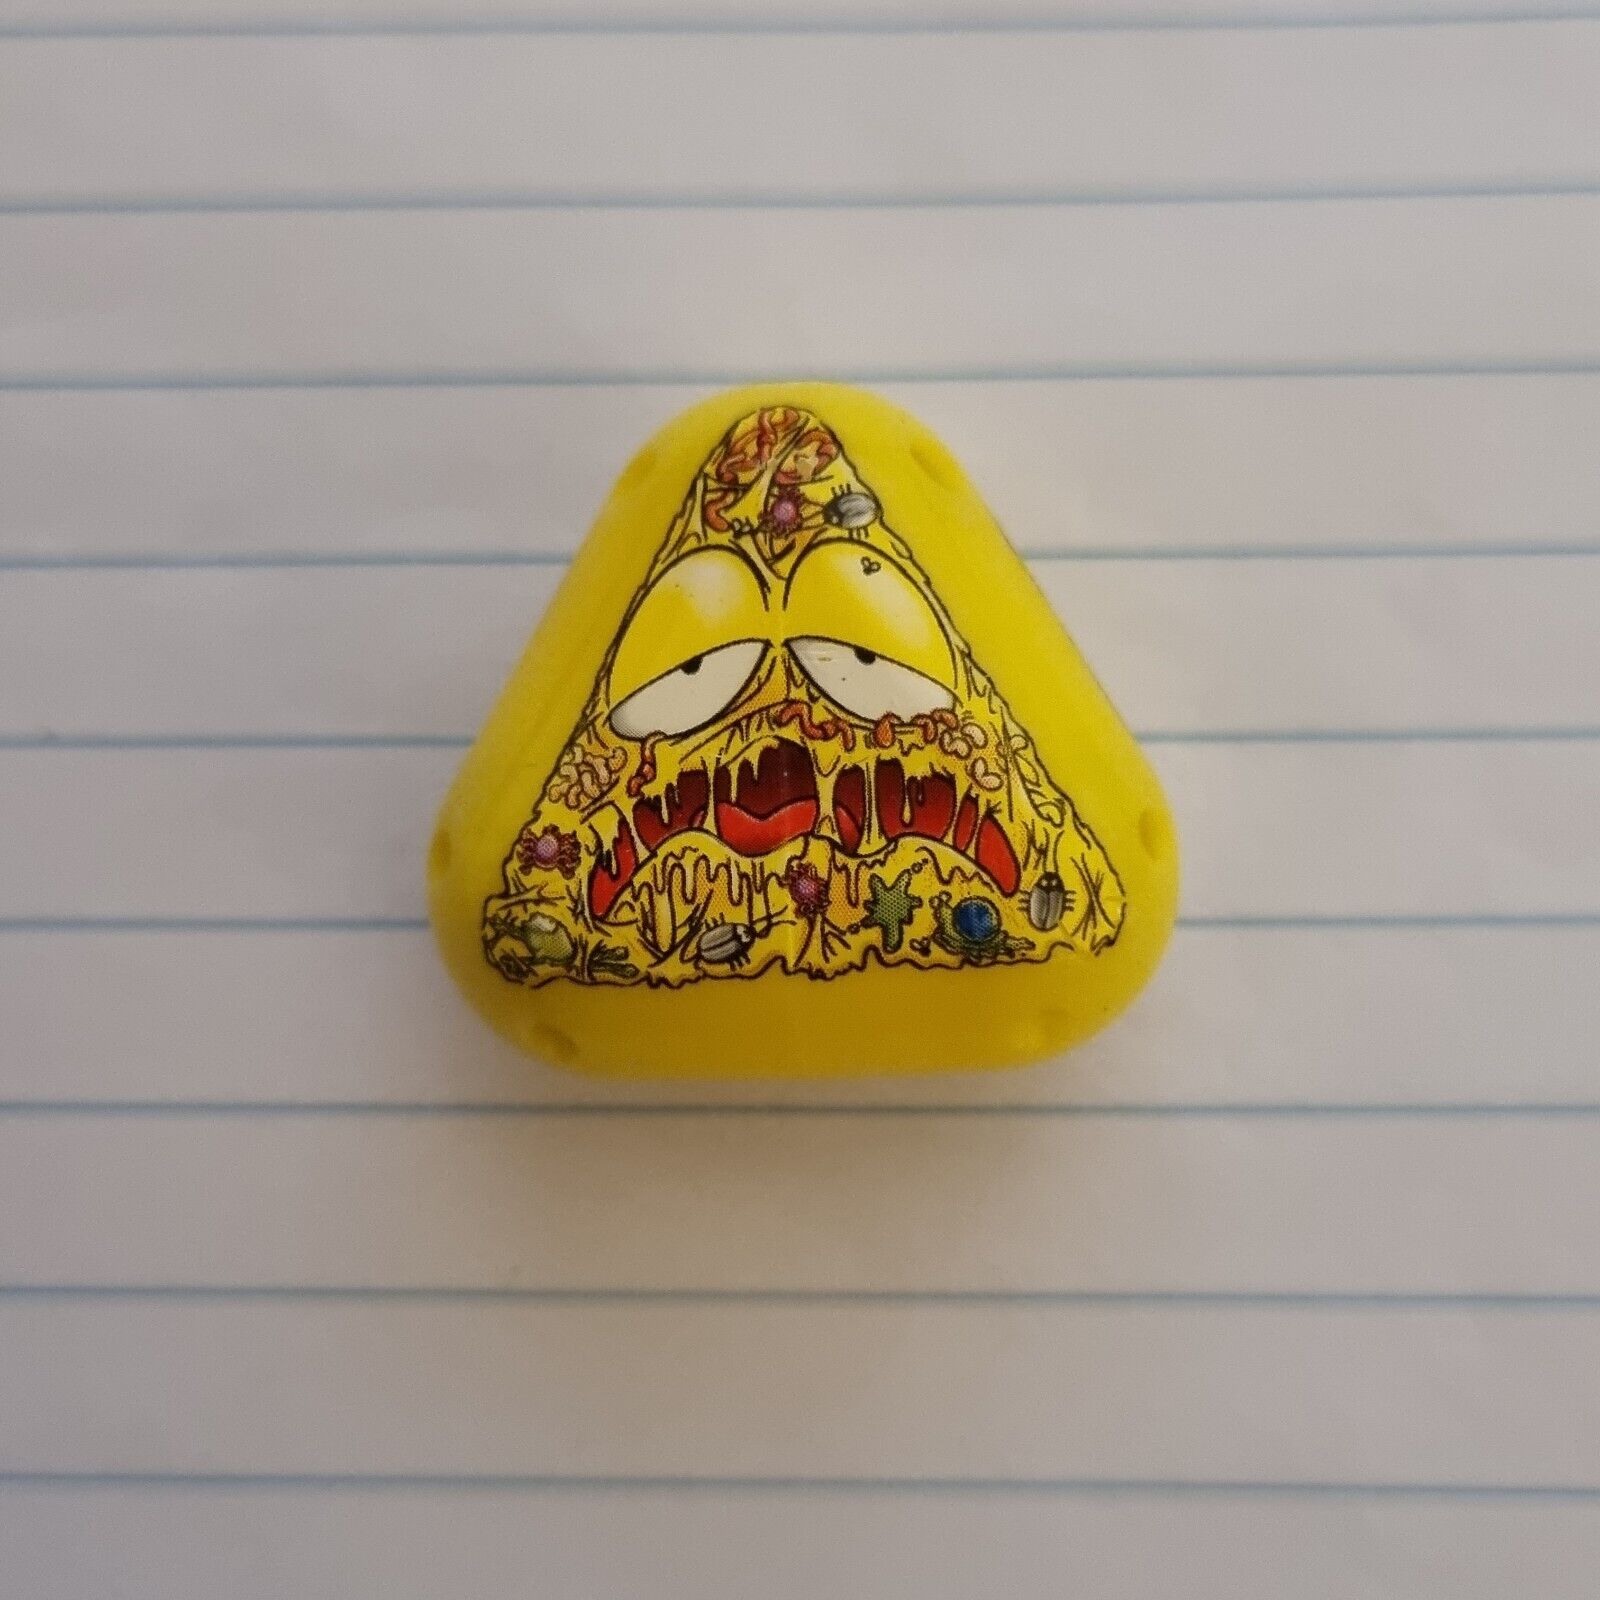 Mighty Beanz Series 4 #516 Gross Pizza Triangle - Special Edition 2010 bean